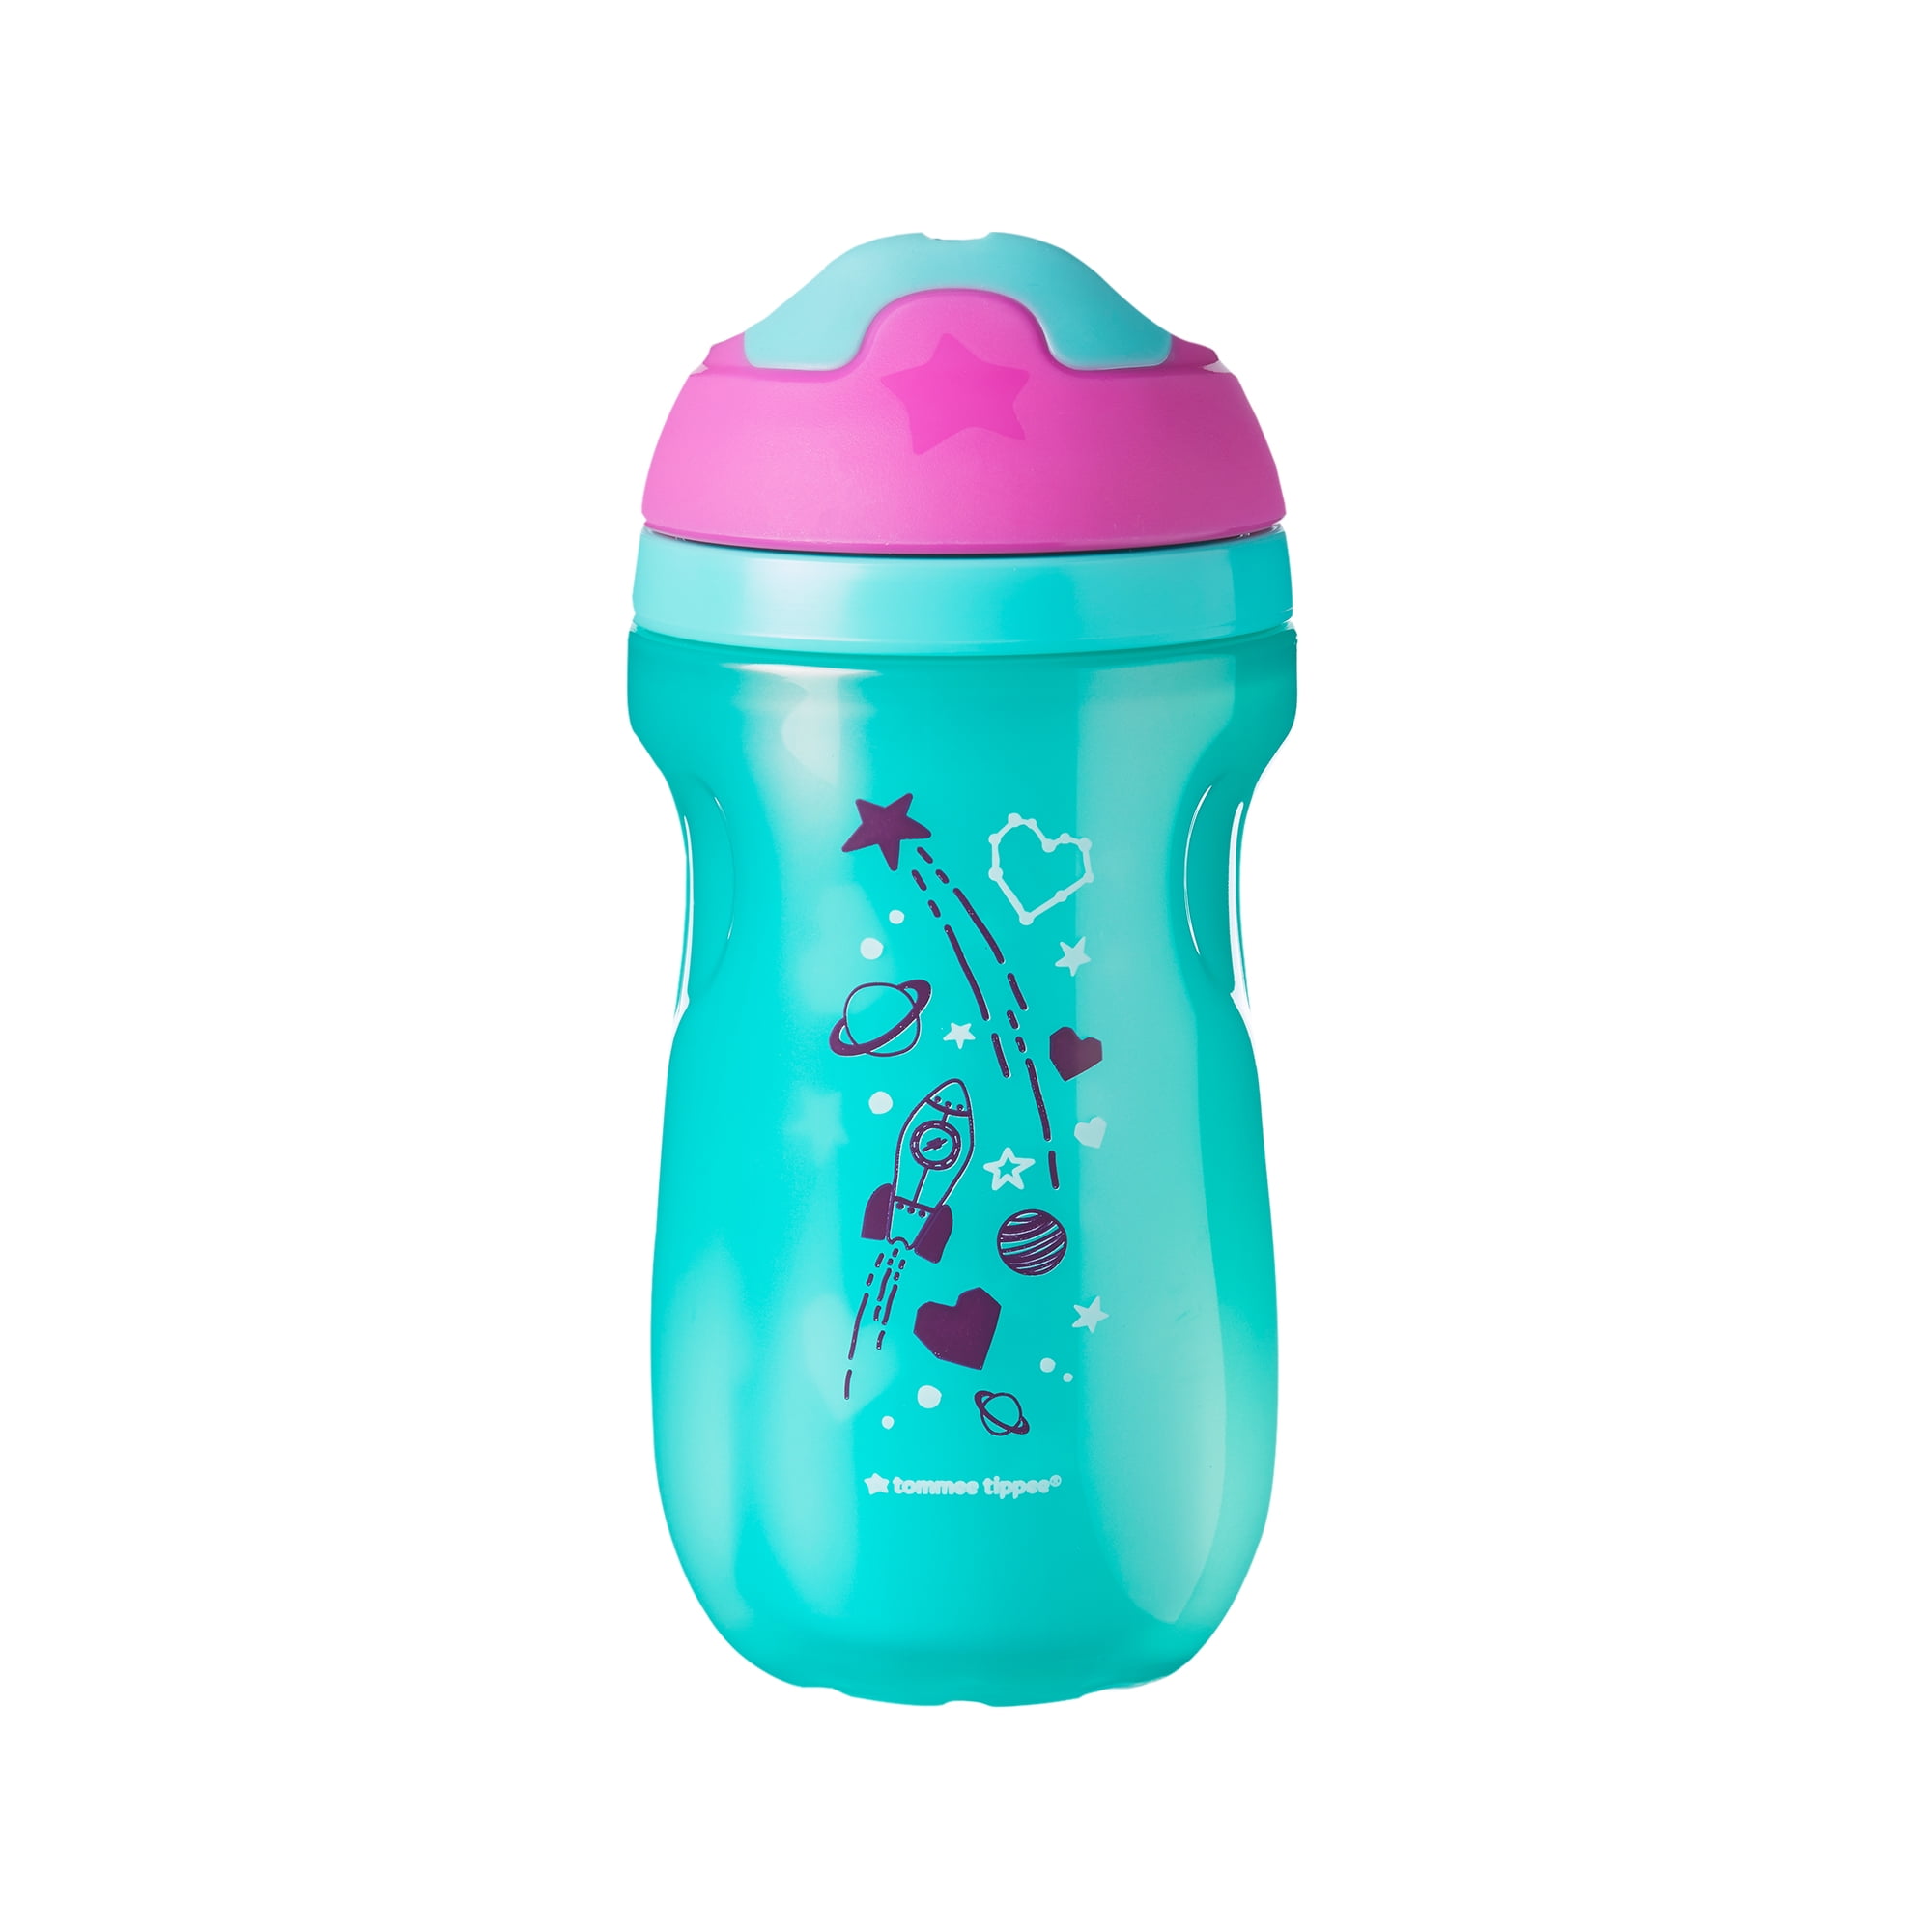 Cute Bugs, Kids Flip Top, Sippy Cup, Spill Proof, Insulated